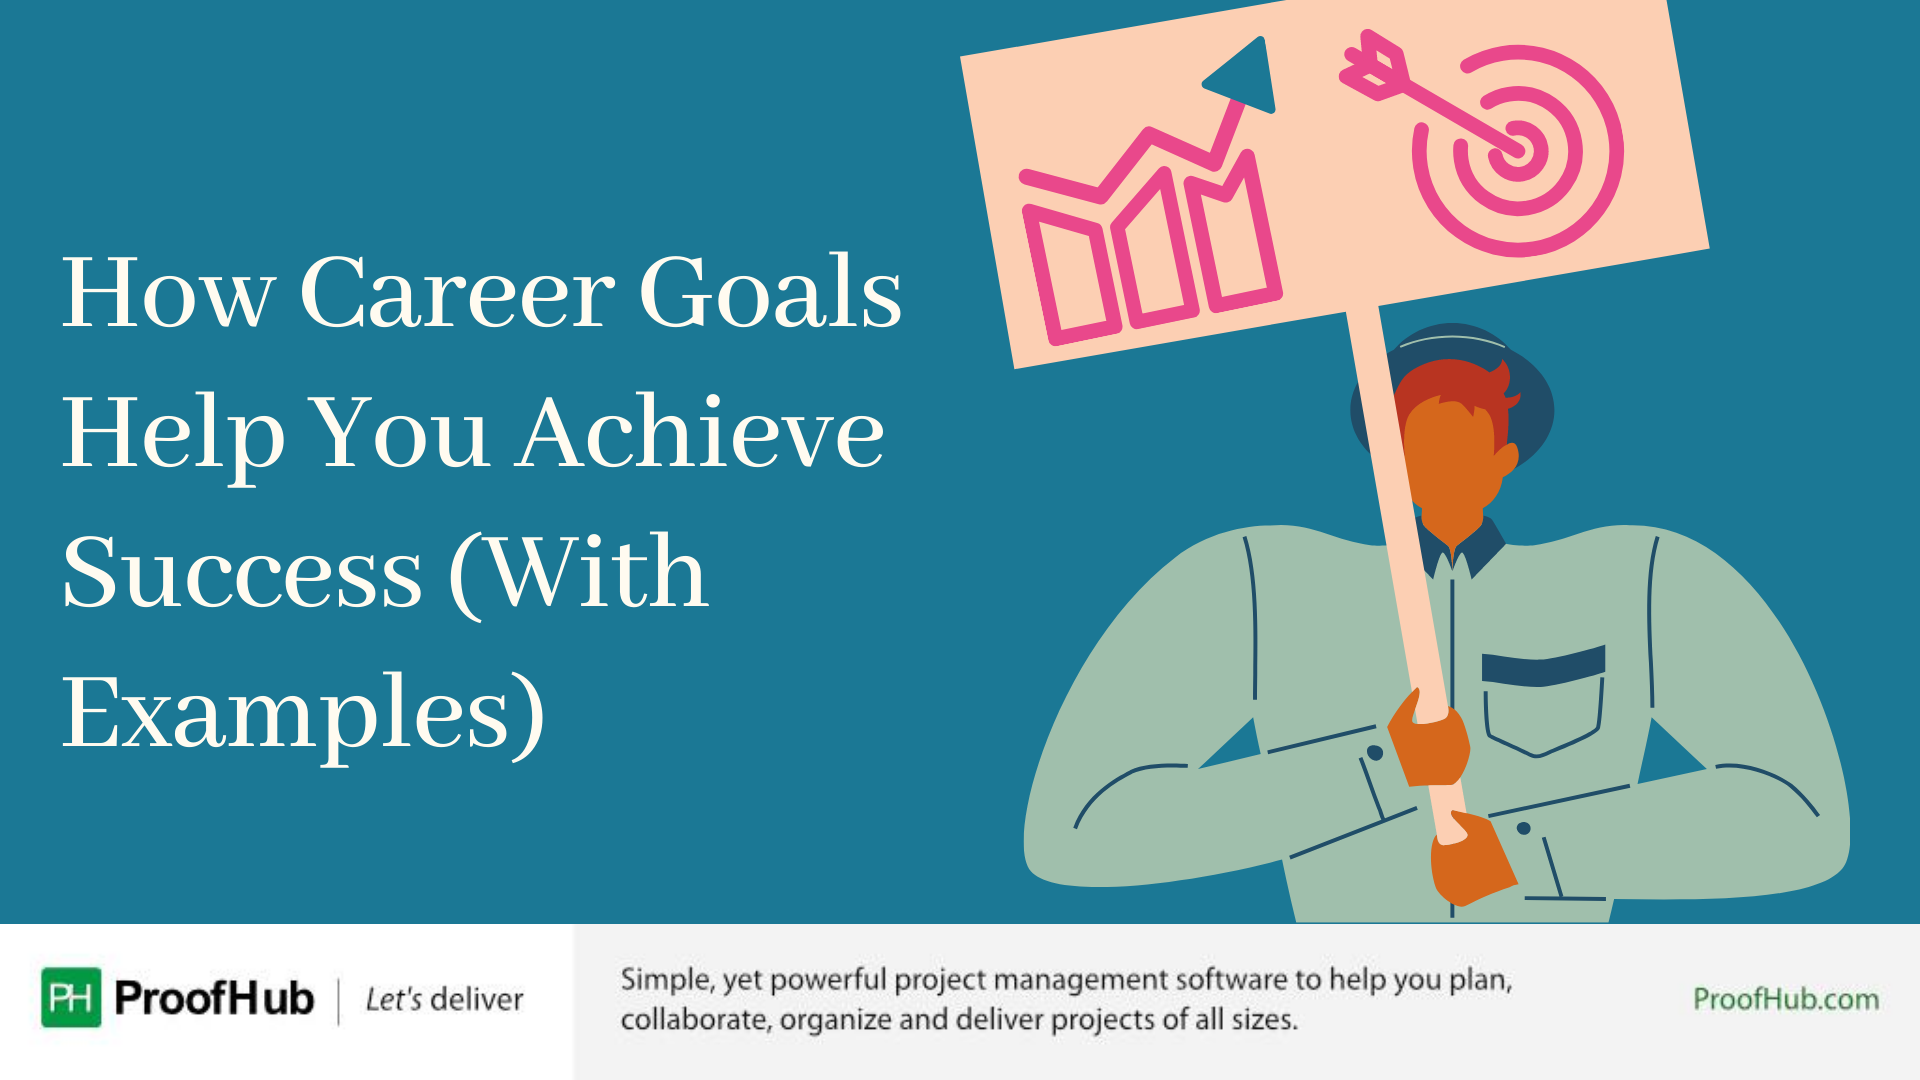 How Career Goals Help You Achieve Success (With Examples)